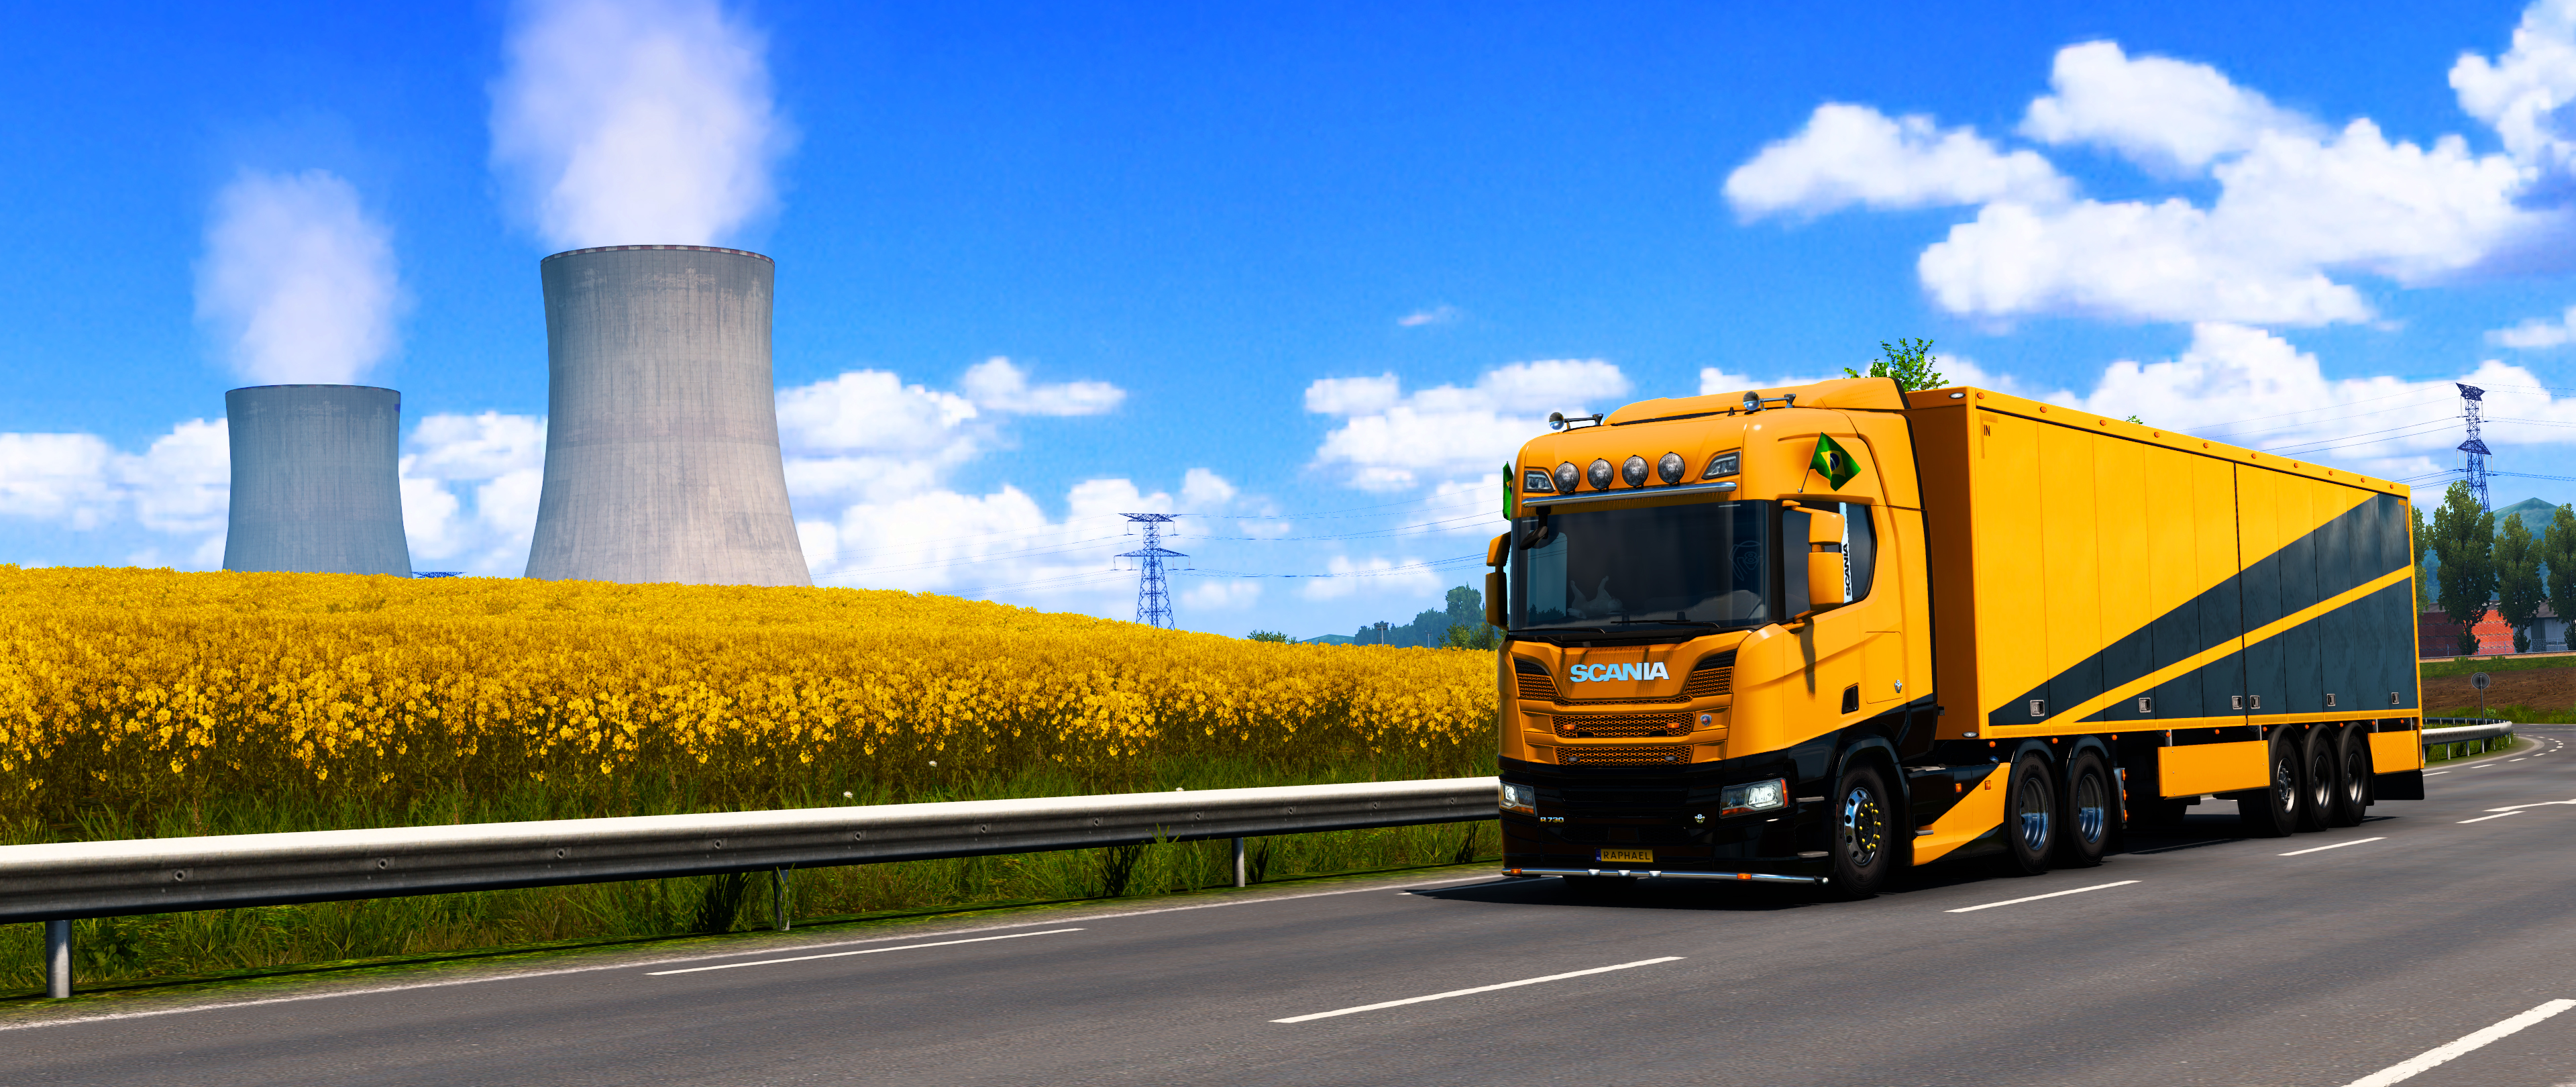 General 3840x1620 Euro Truck Simulator 2 SCS Software Scania DLC Iberia truck VTC FBTC nuclear power plant sunflowers Sunny video games clouds sky frontal view vehicle road Scania R NG